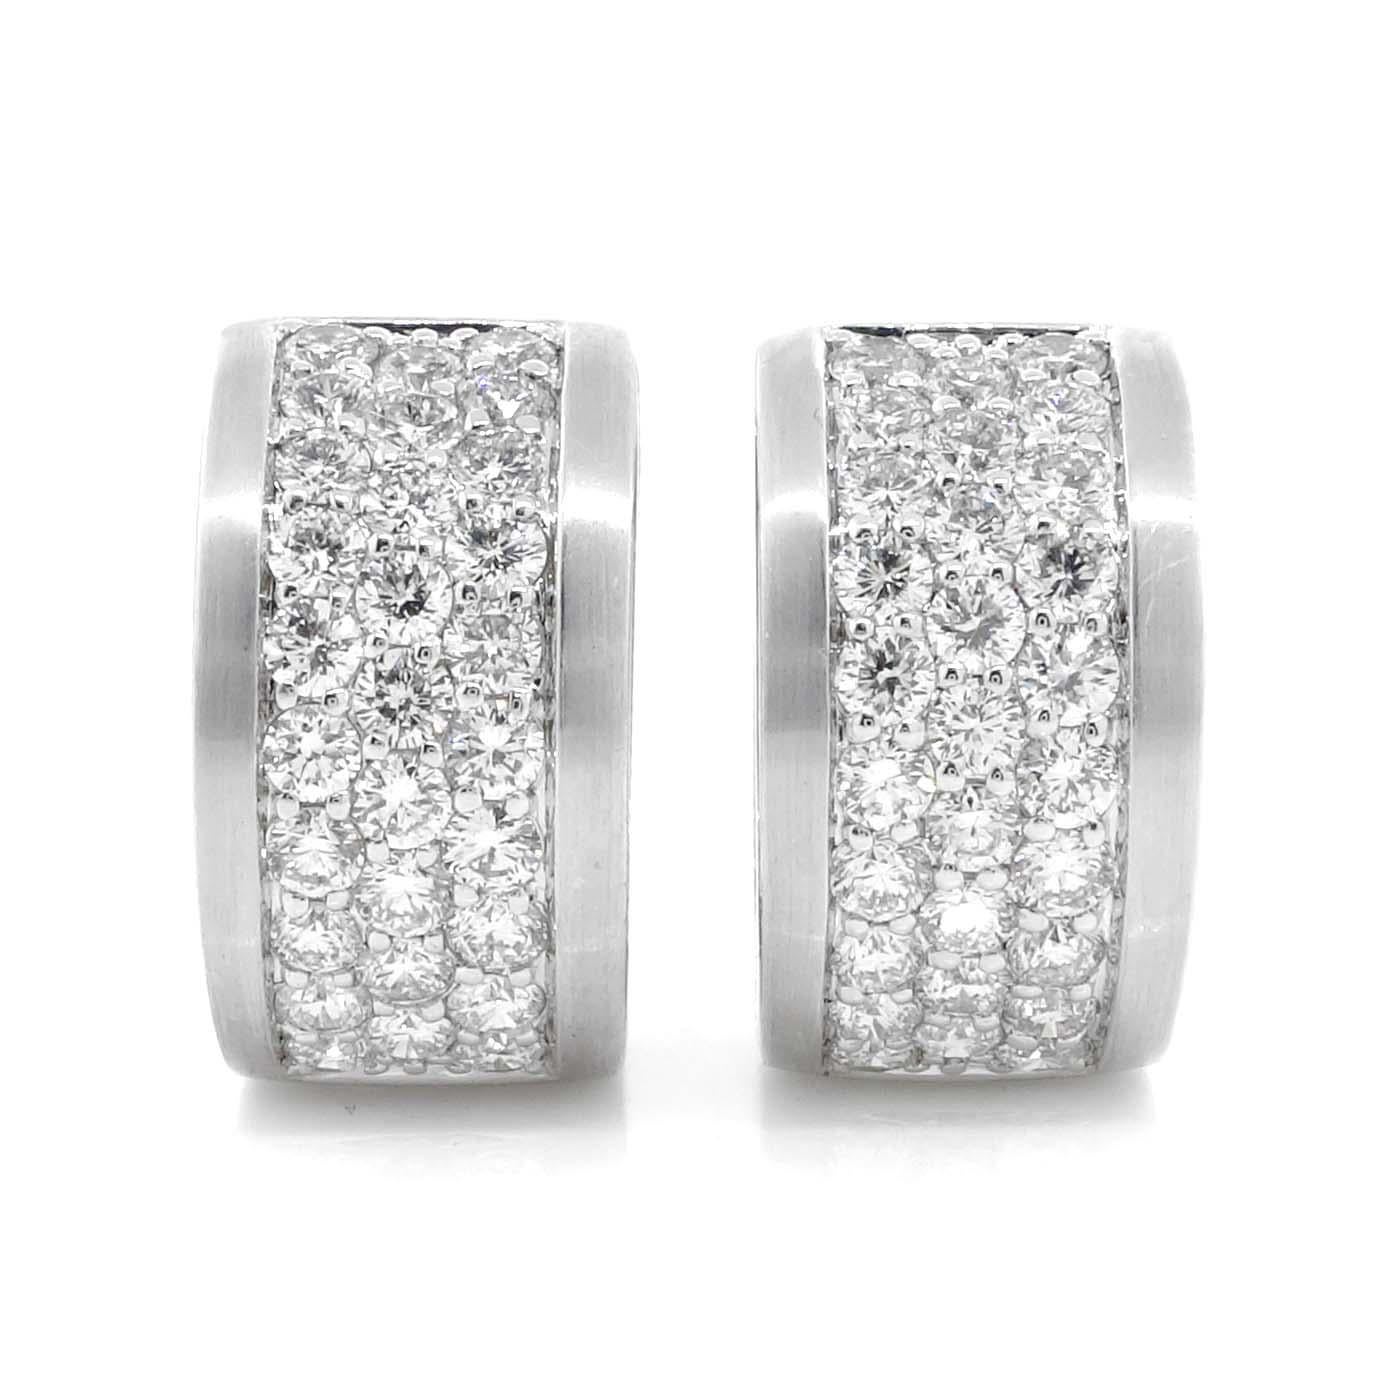 Hoop diamond earrings containing 58 round brilliant cut diamonds of about 1.70 carats with a clarity of VS and color G. All diamonds are set in 18k white gold earrings. The total weight of the earrings is approximately 11.92 grams.